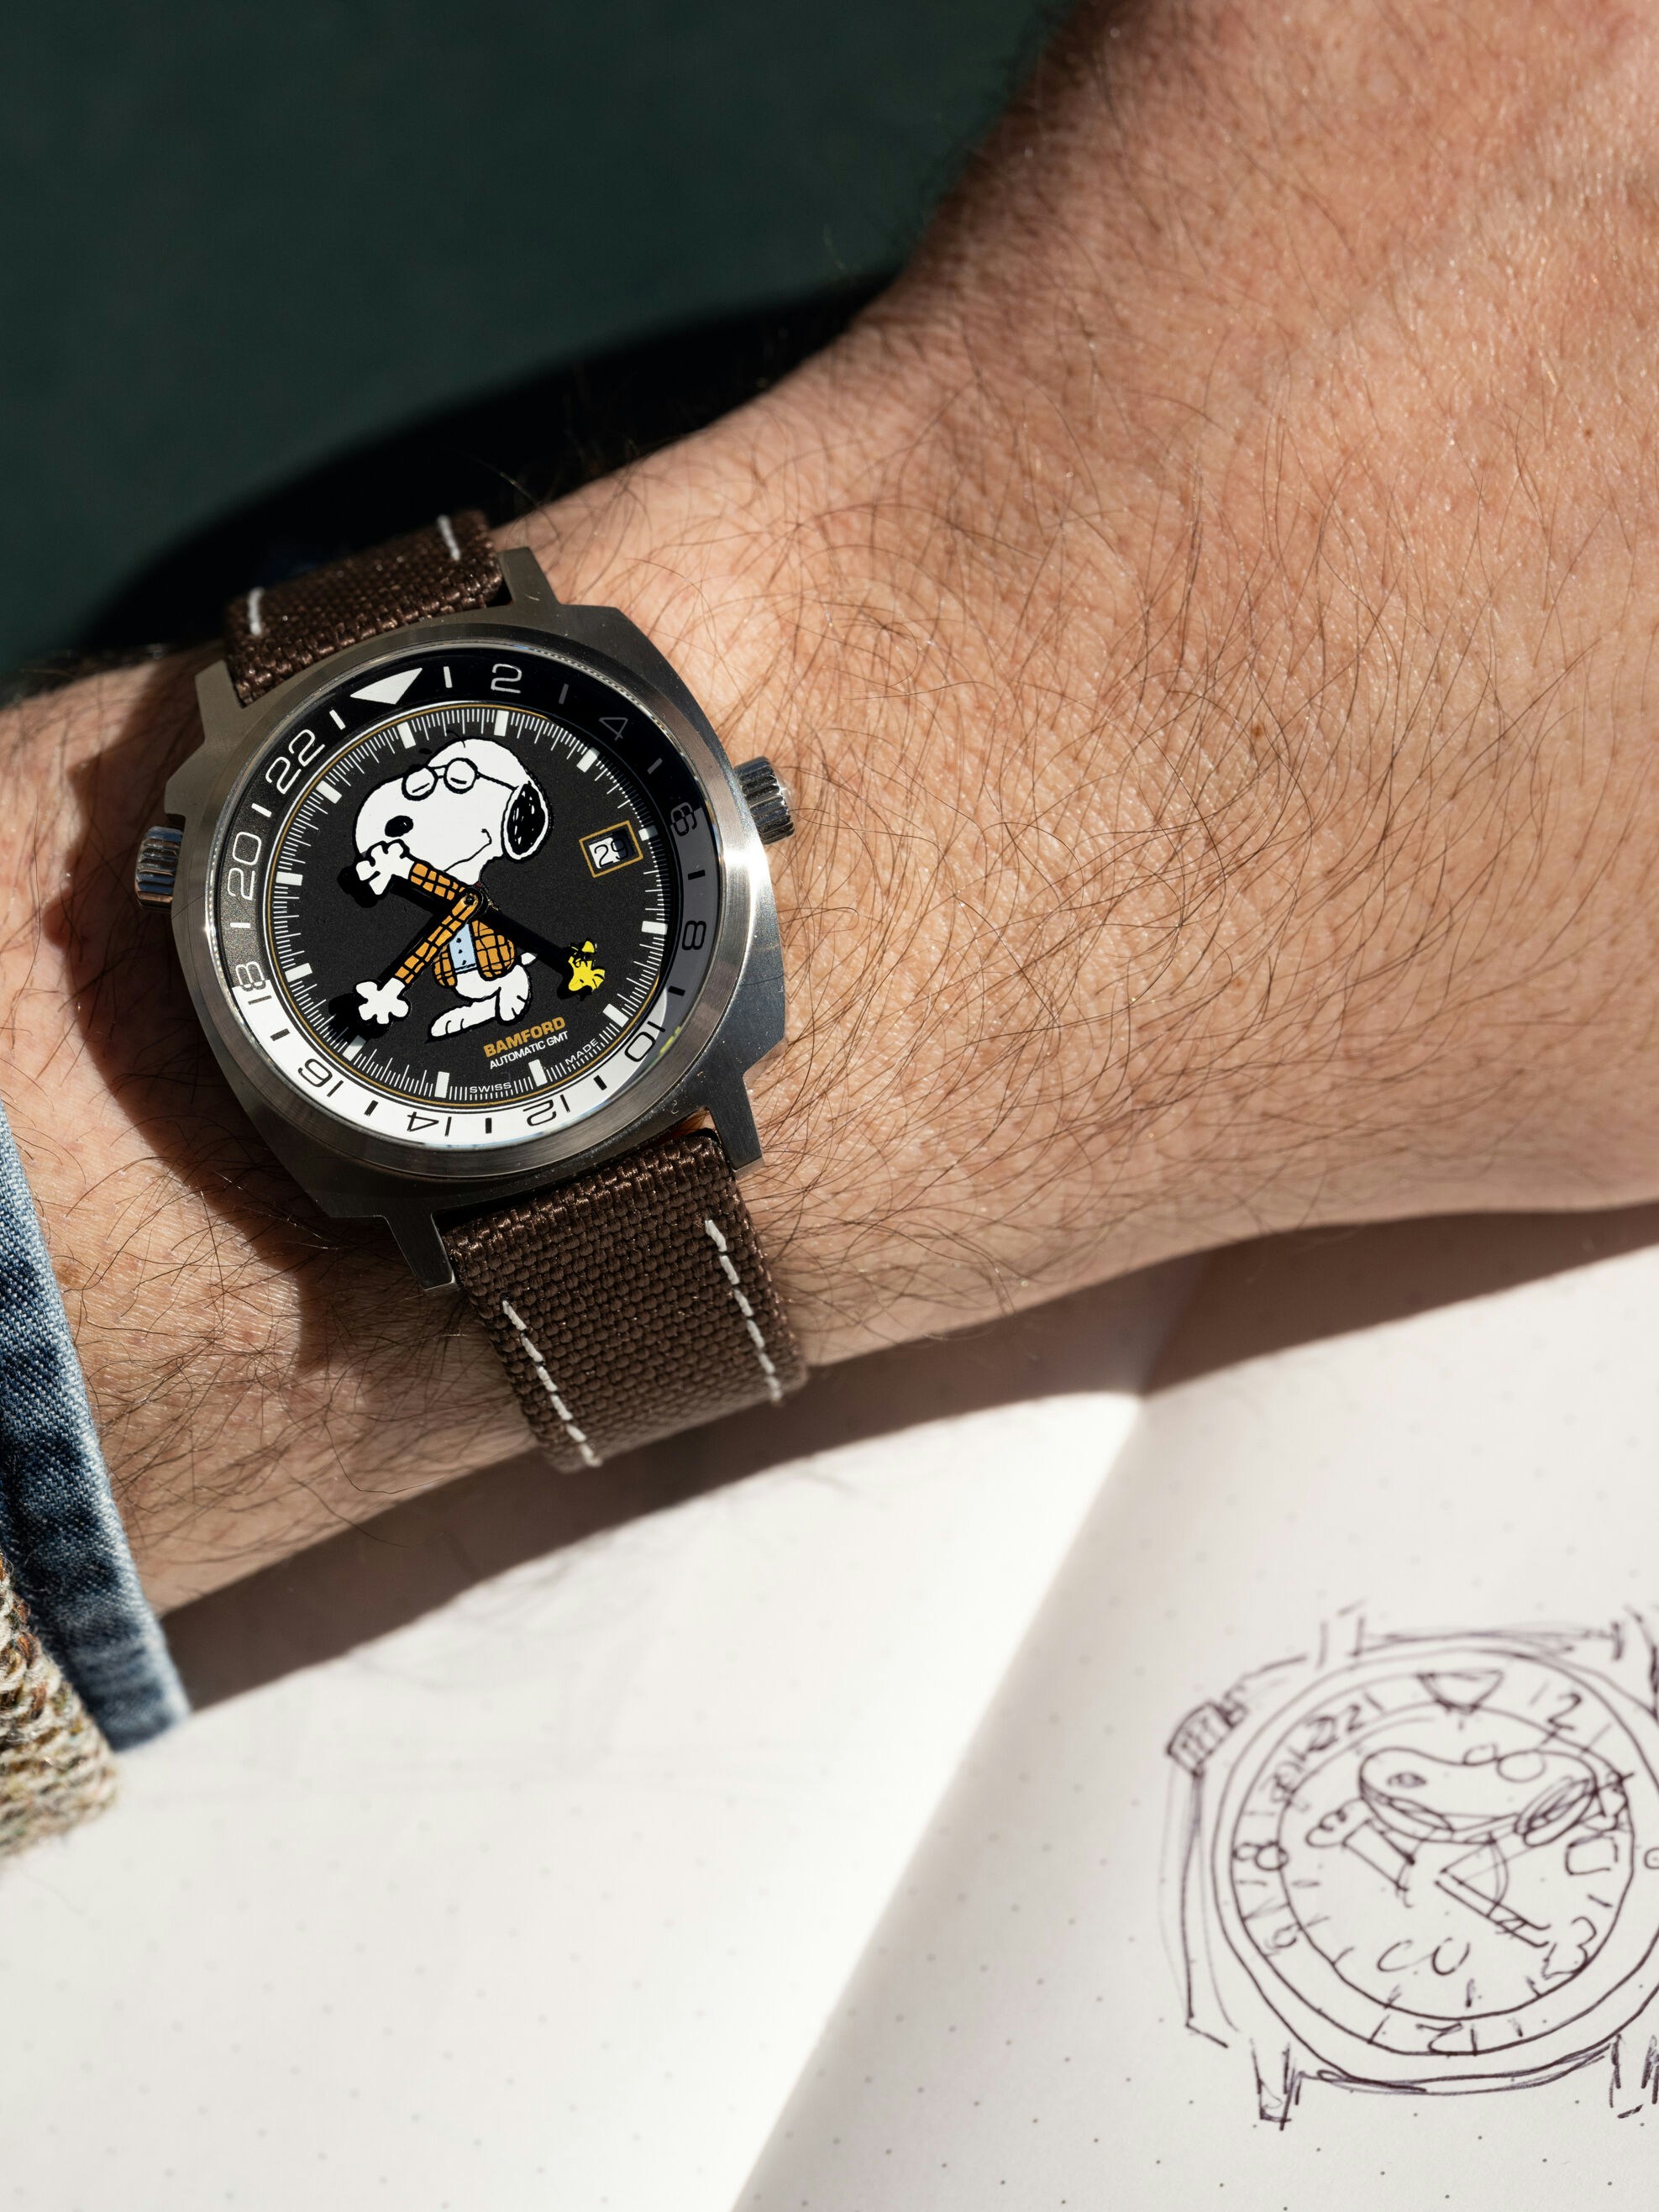 George Bamford creates a limited-edition, no-nonsense tool watch